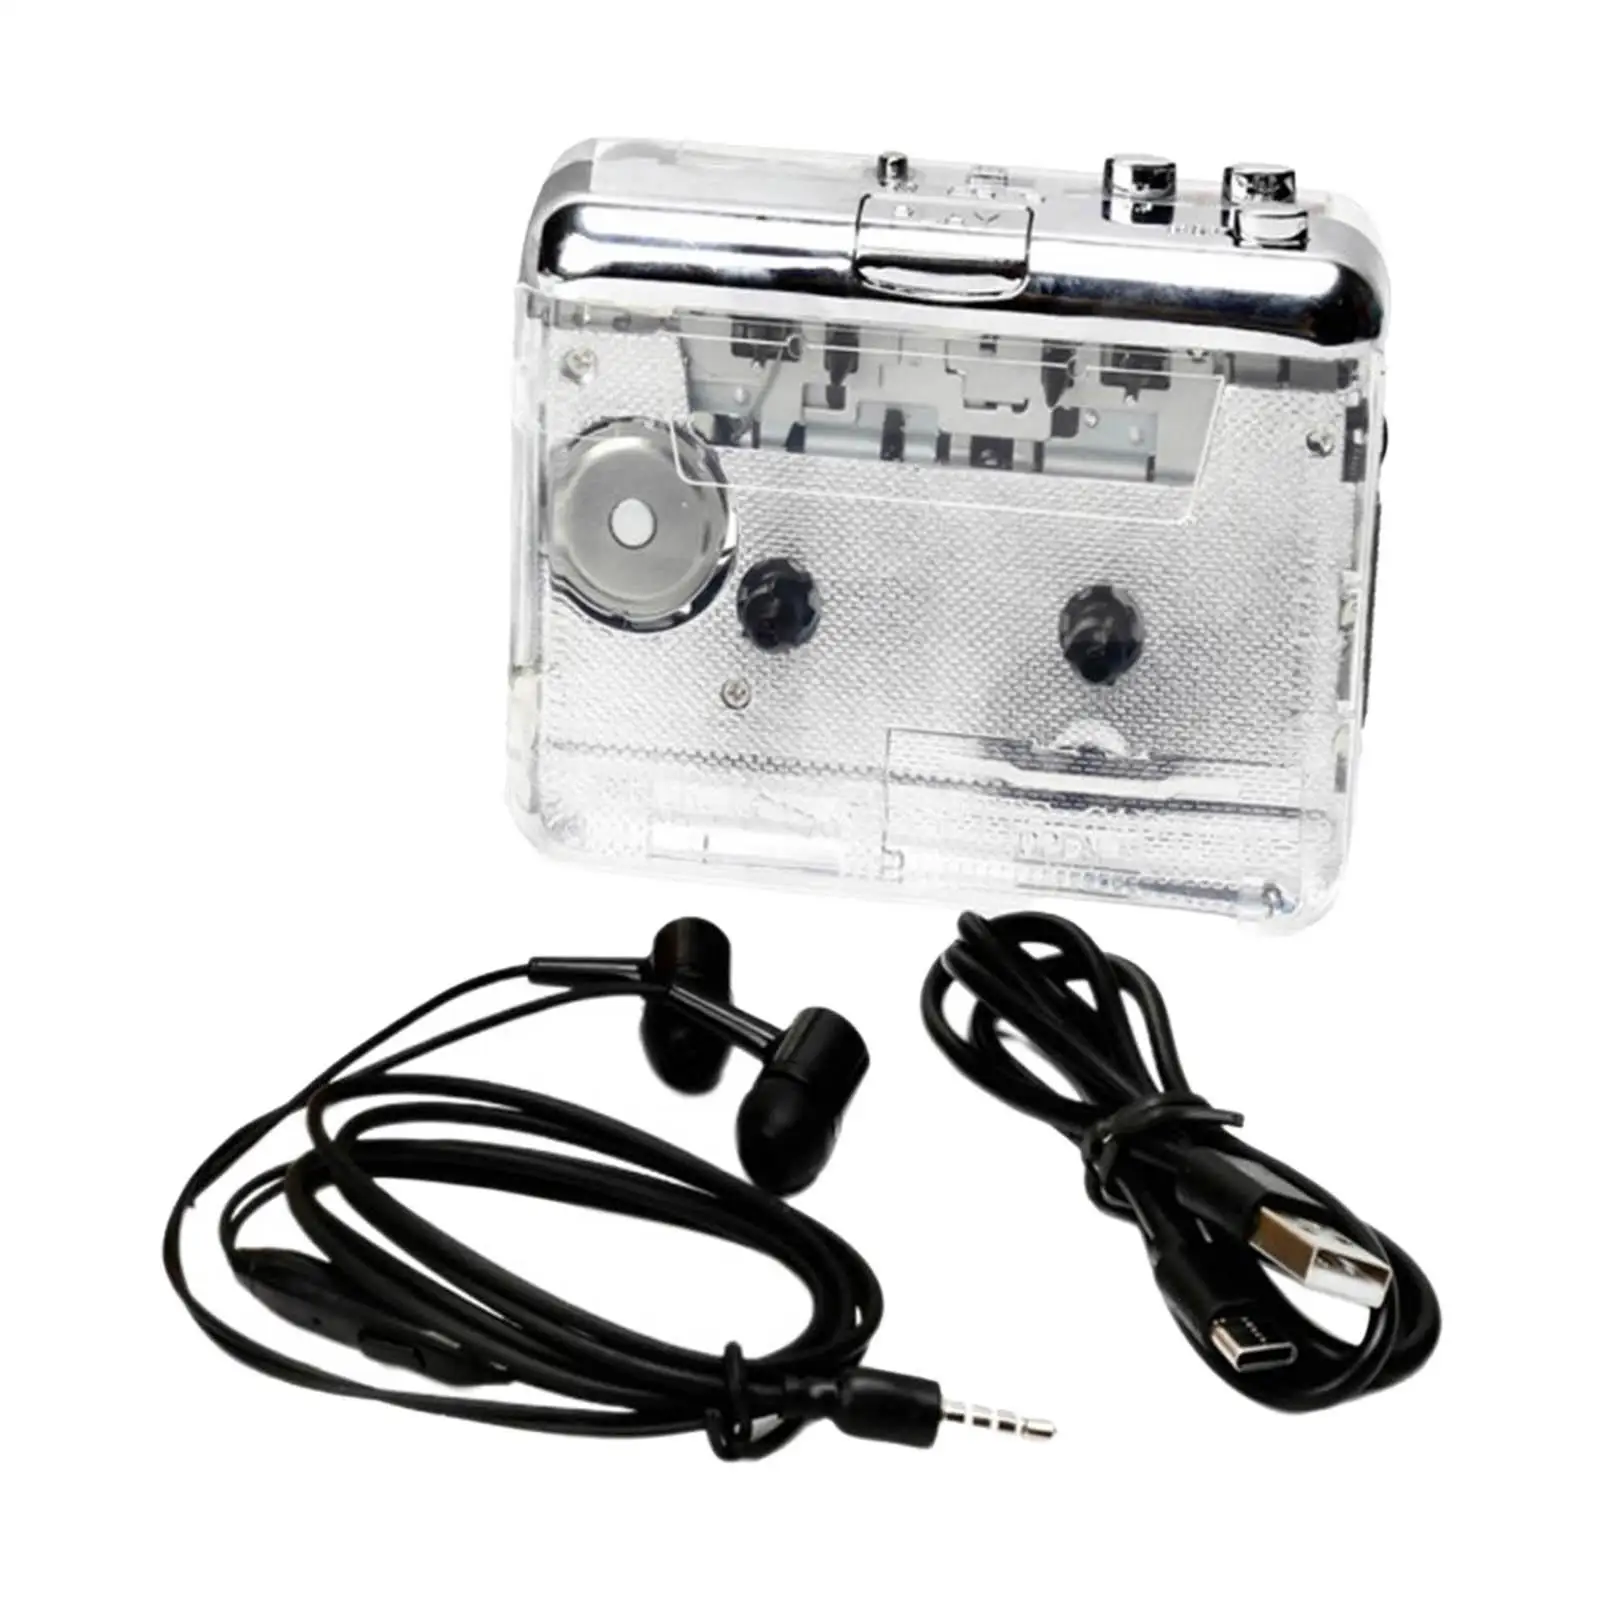 USB Cassette Tape to MP3 CD Cassette Player Type C Cable Powered Batteries Powered Converter for Laptop PC for Windows XP/7